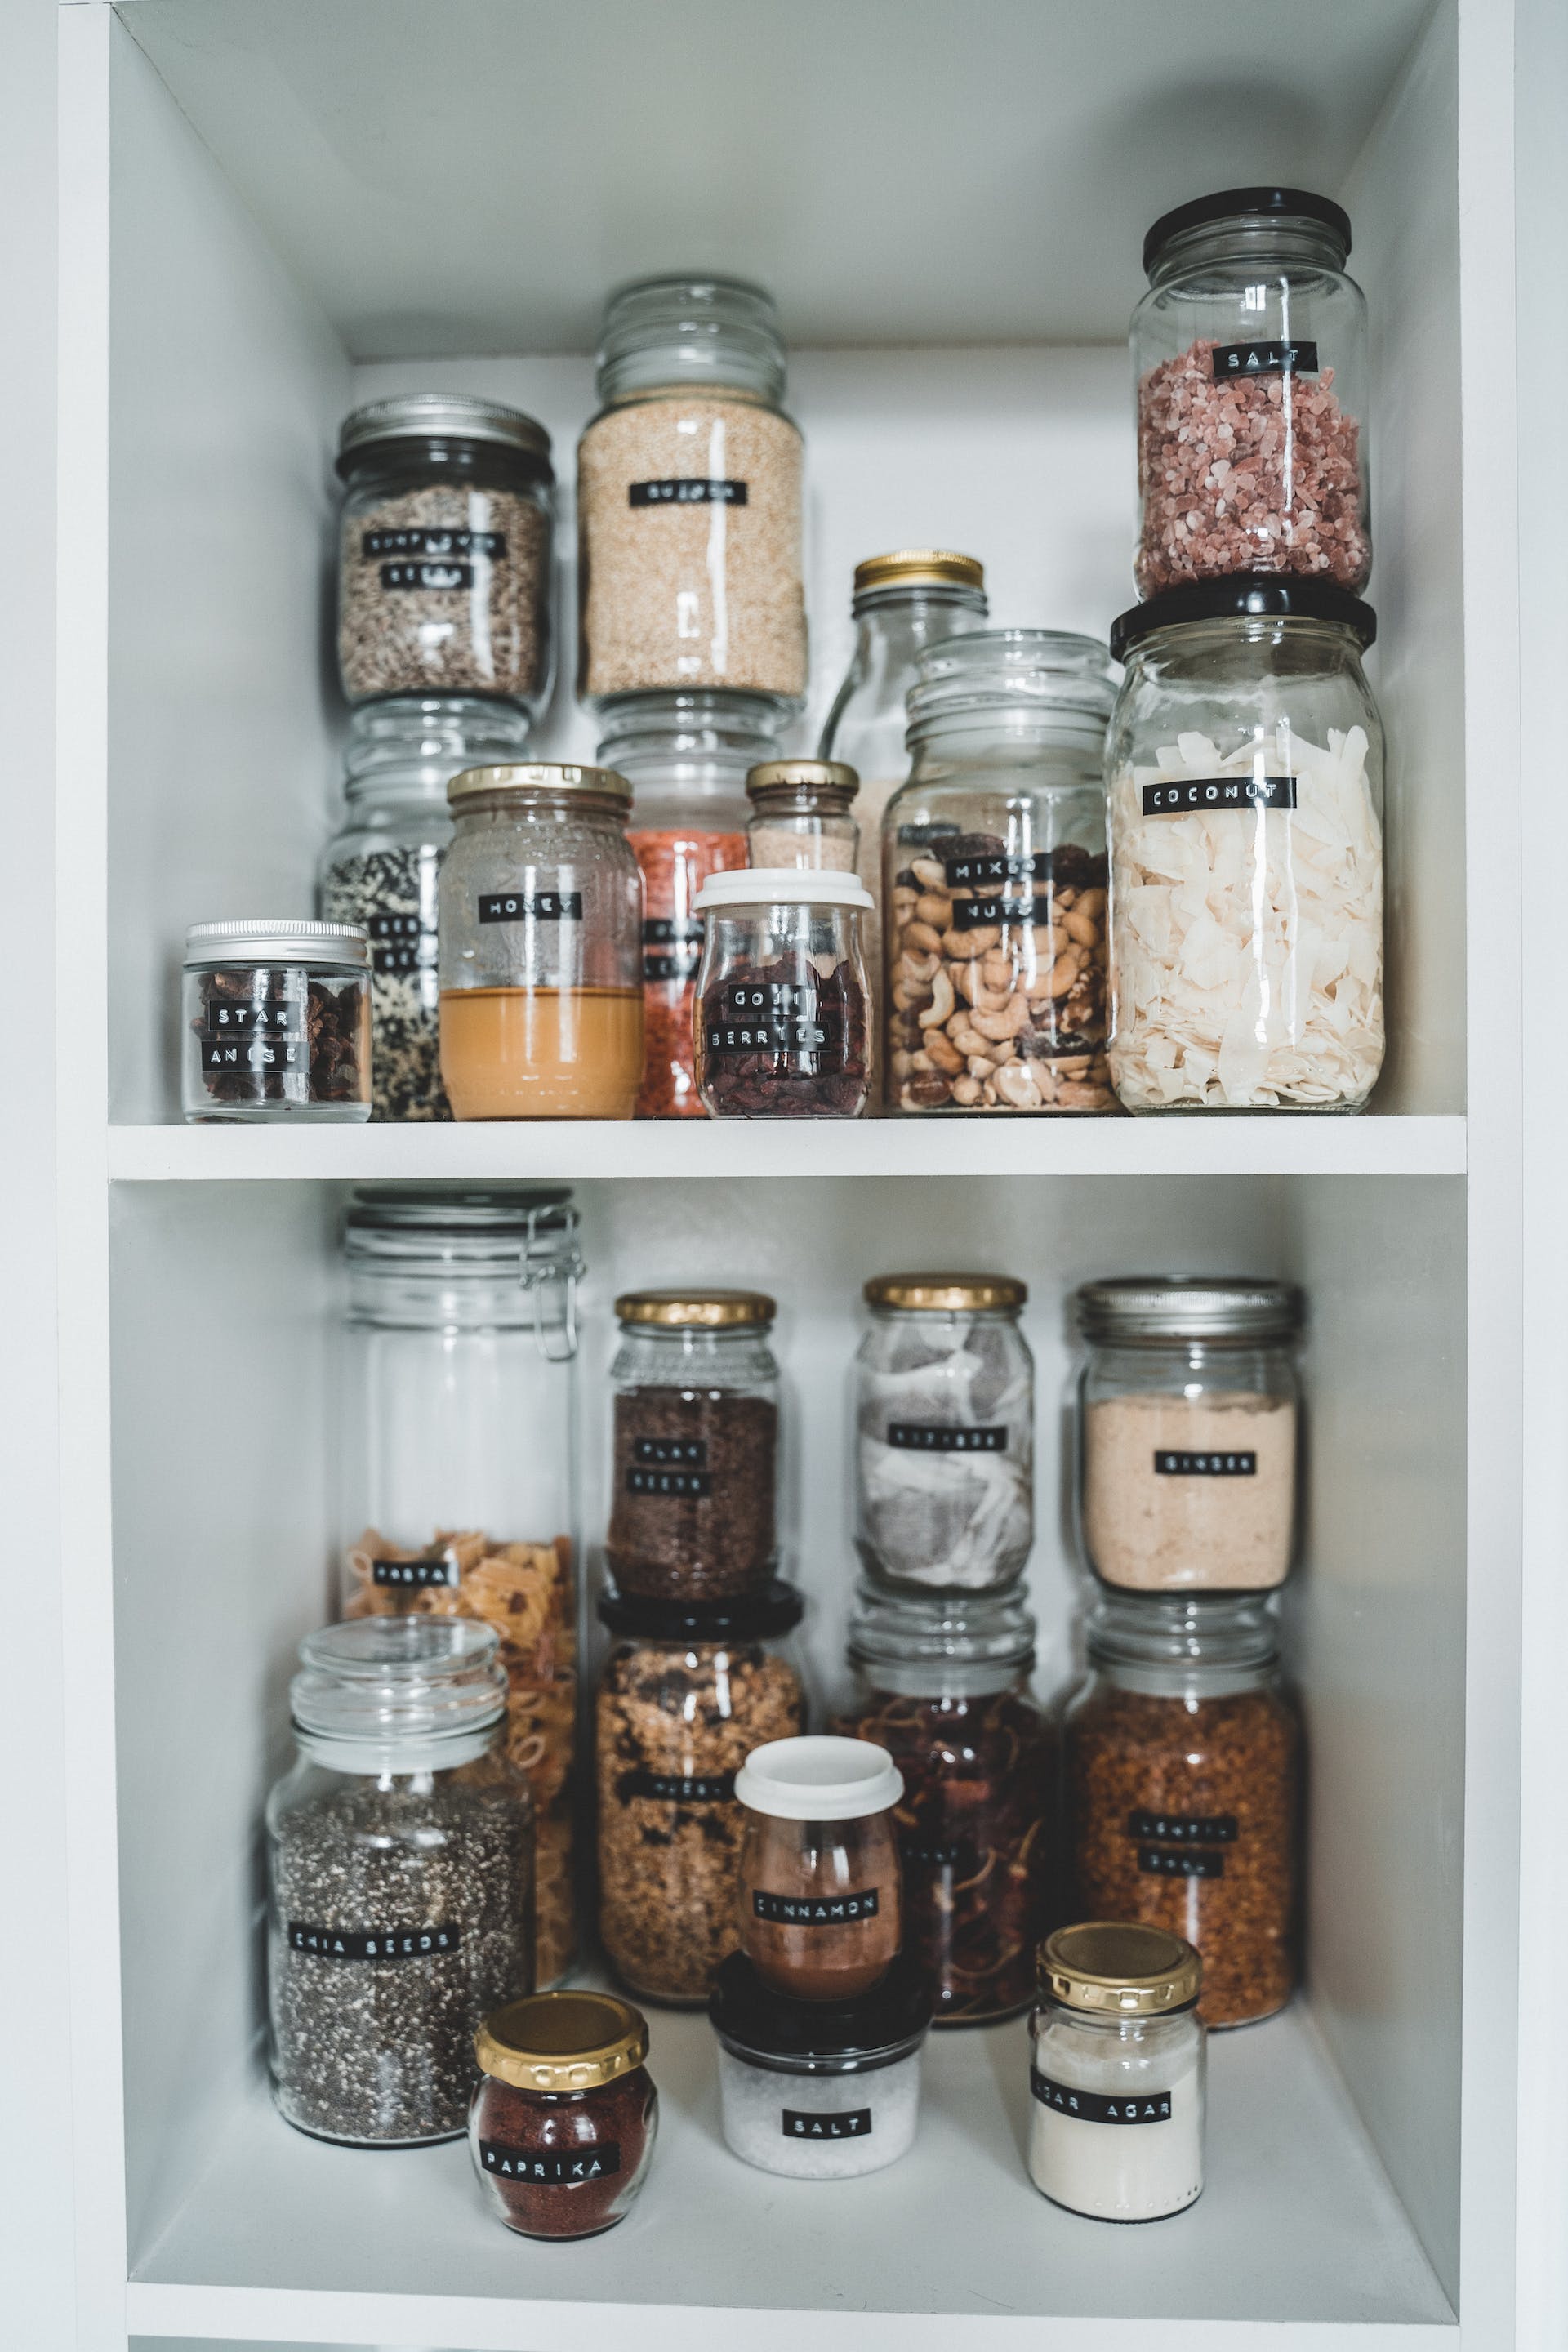 Clear mason jars in a cabinet | Source: Pexels